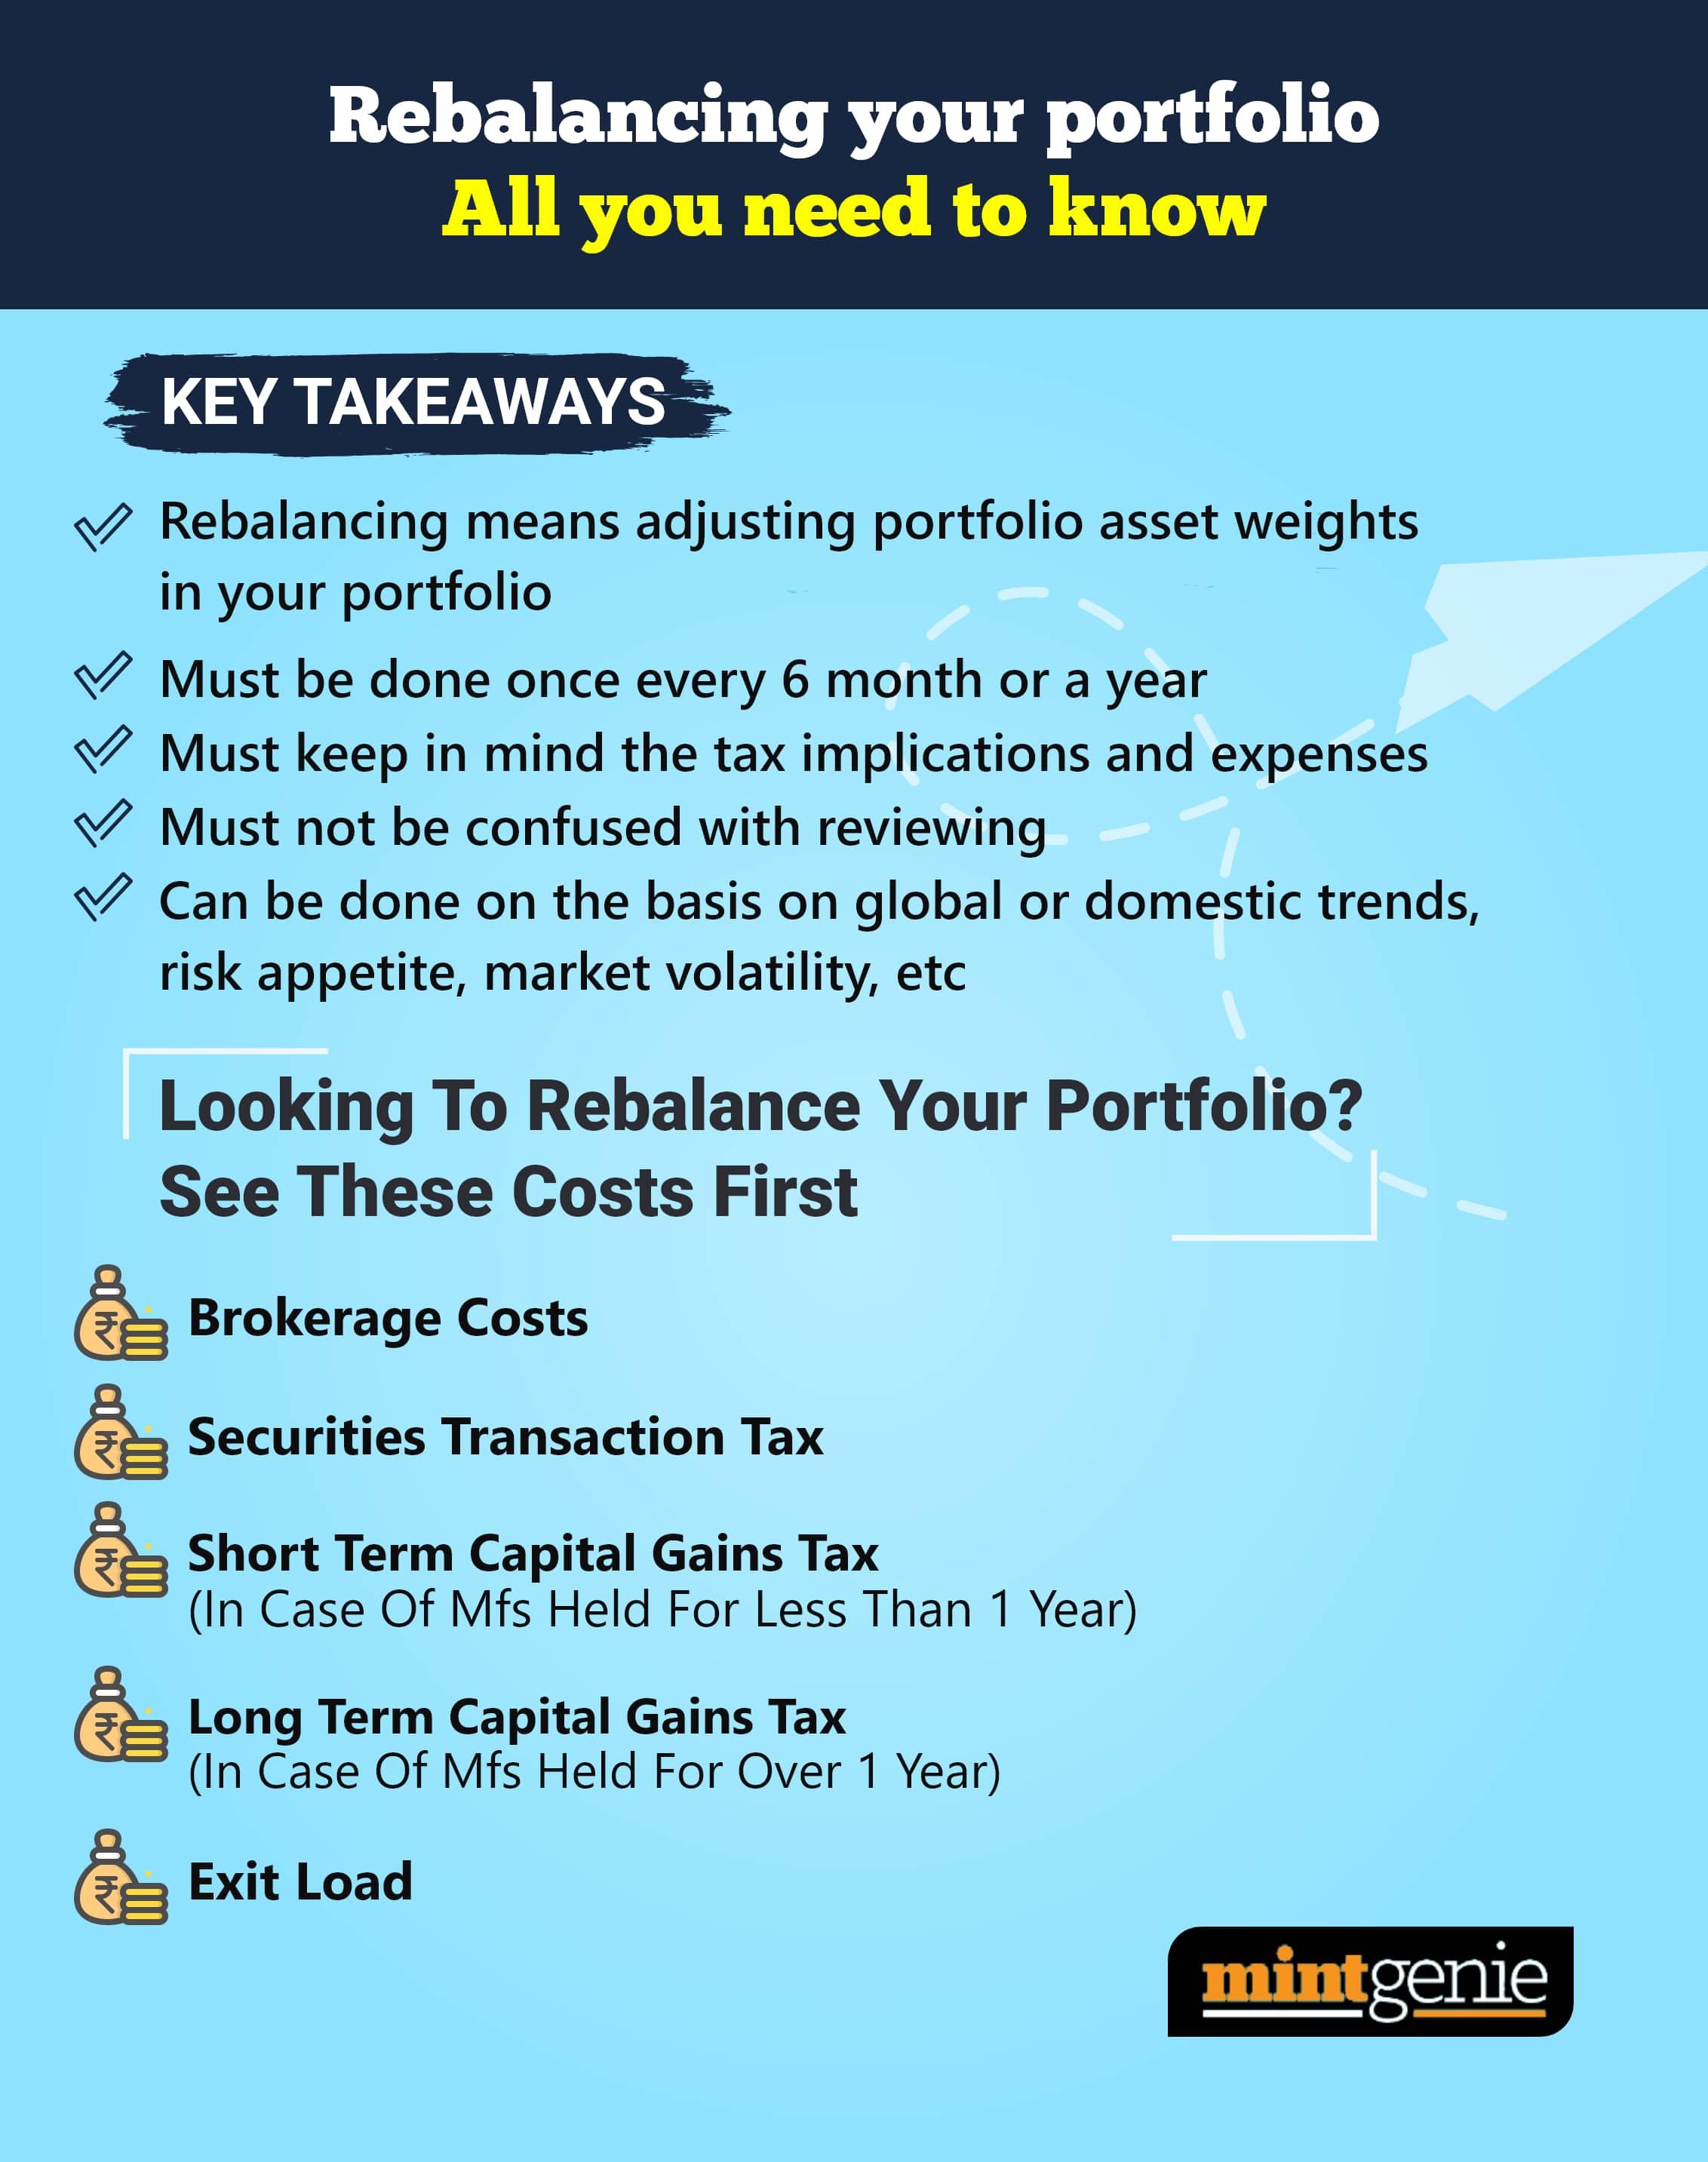 Rebalancing is strictly realigning or readjusting the weights of your assets in your existing portfolio.